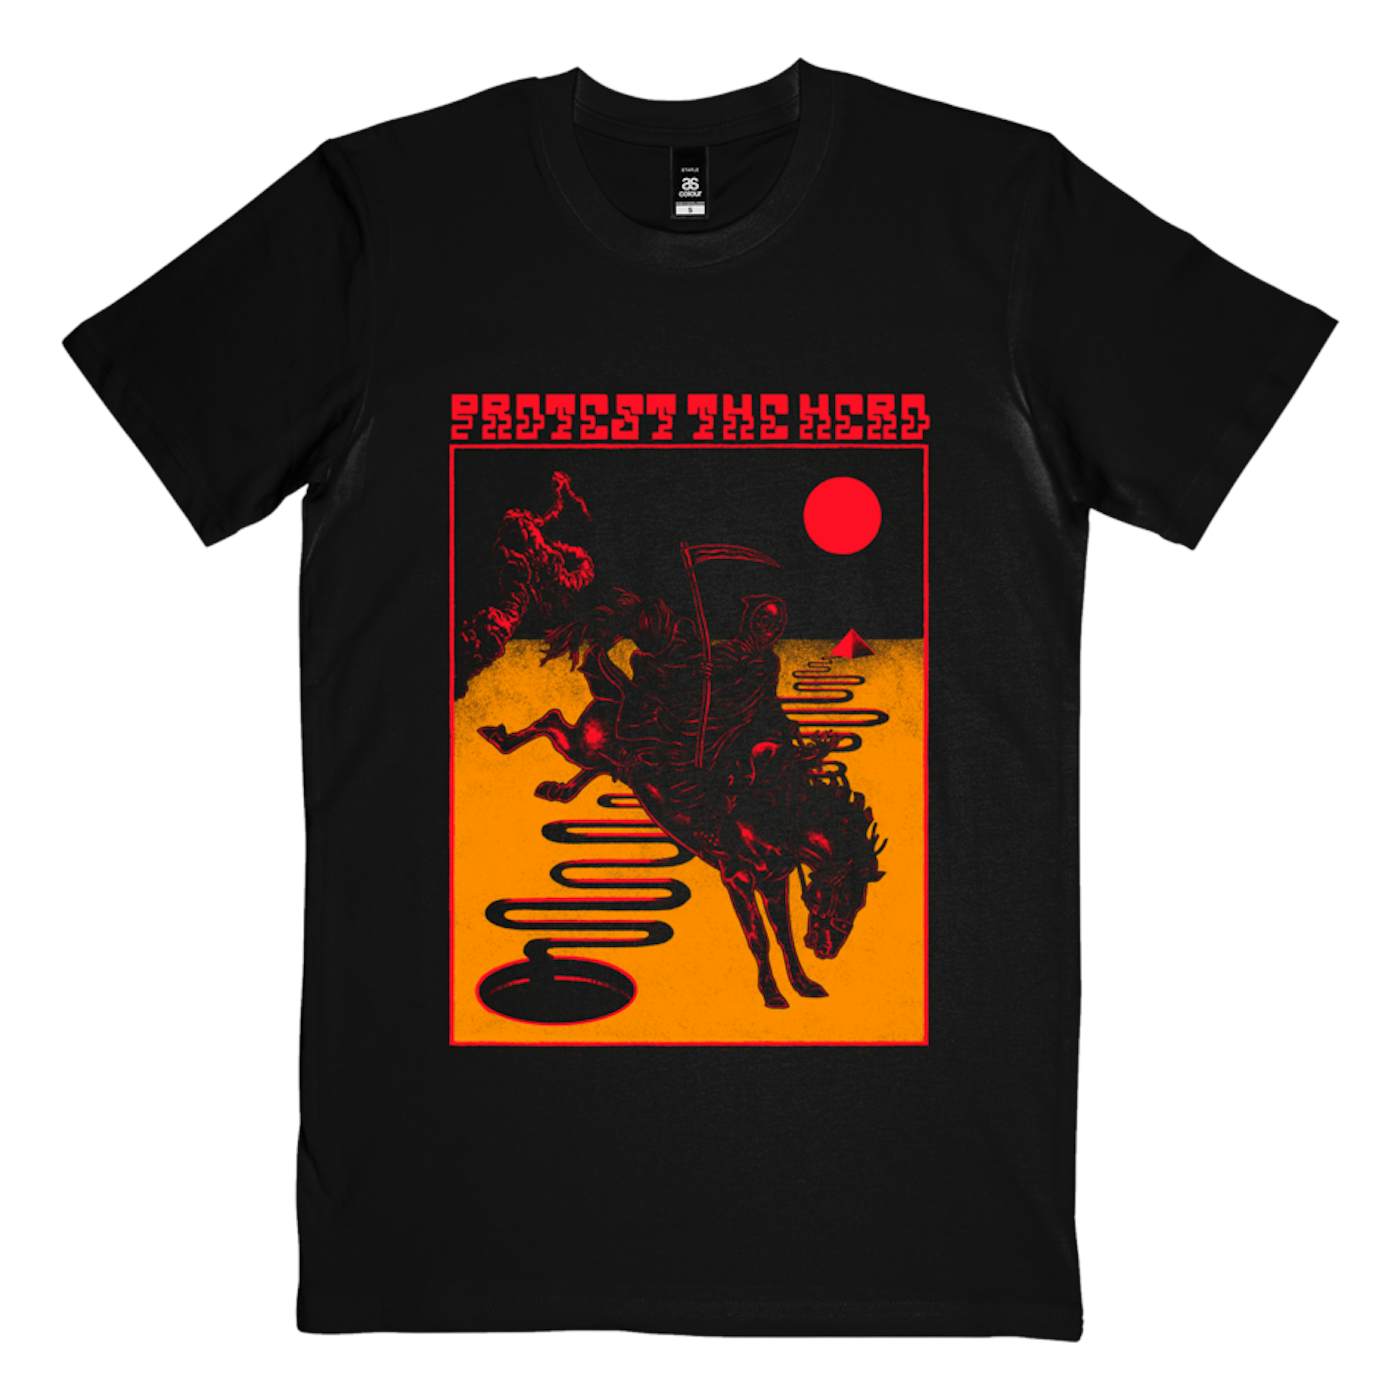 Protest The Hero "Death" T-Shirt